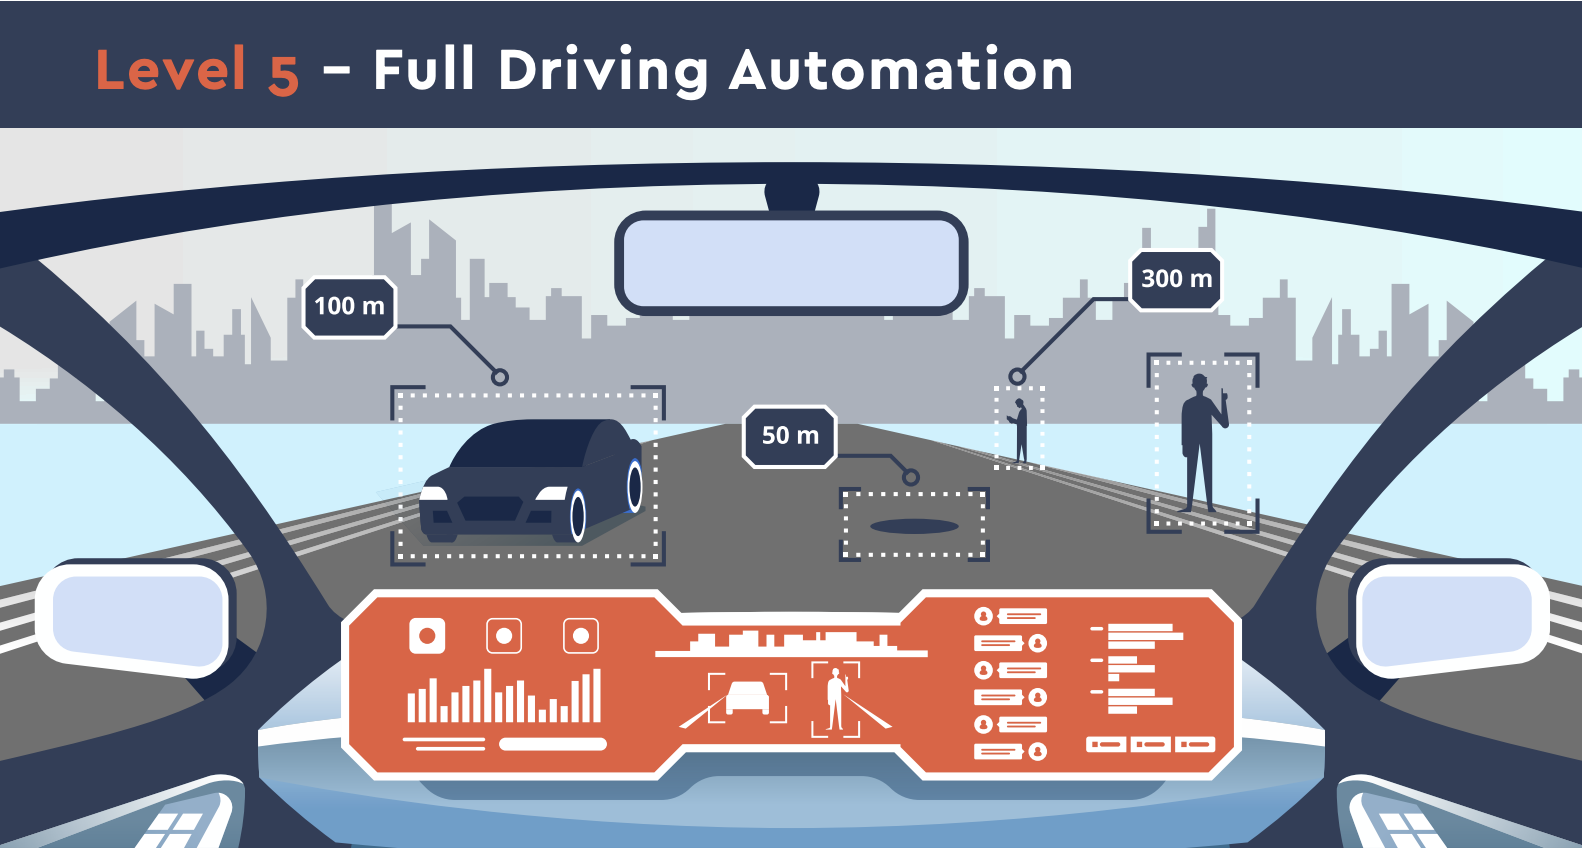 Full Driving Automation